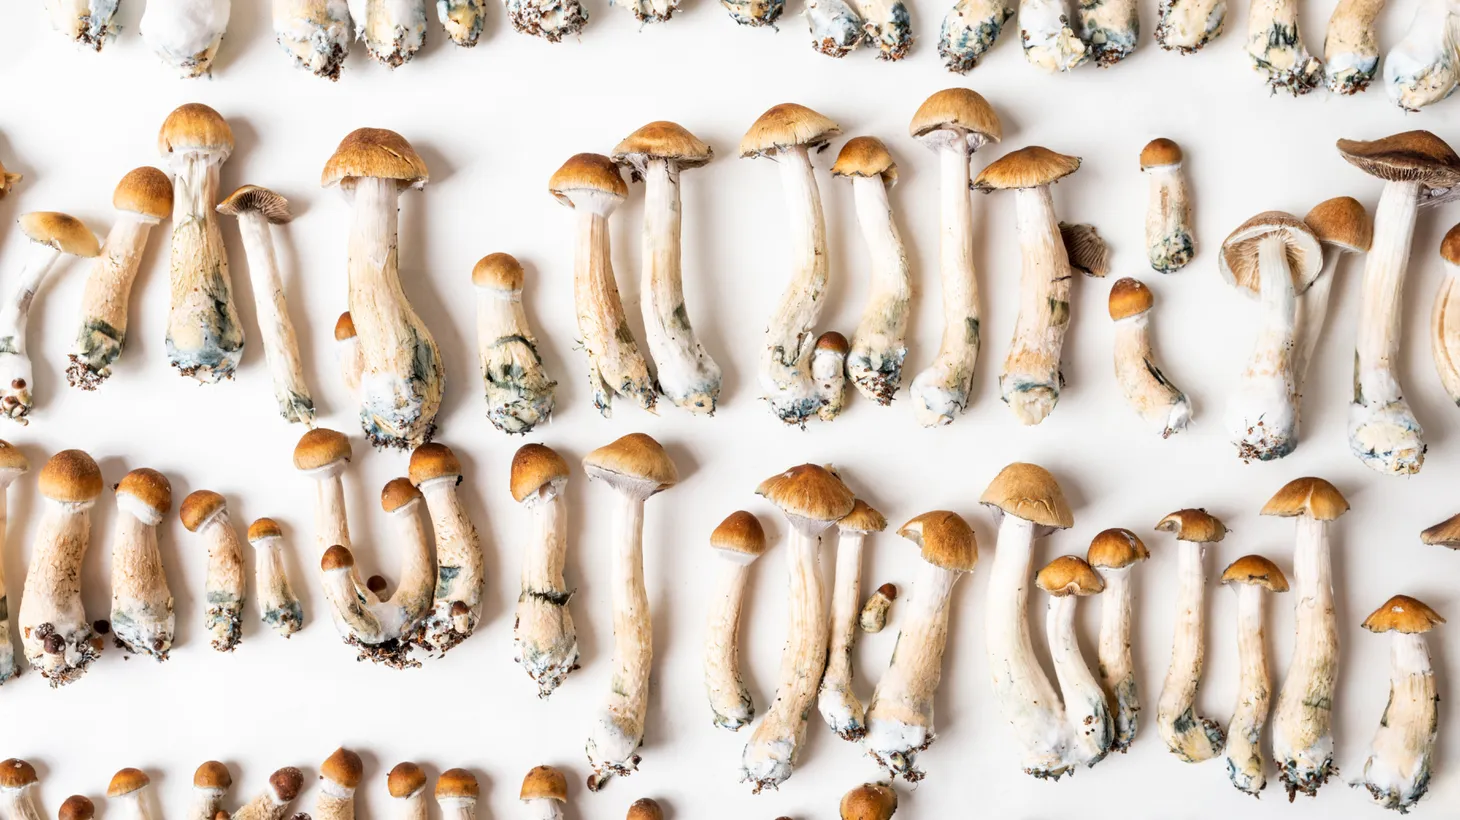 A new bill to decriminalize earth-grown psychedelics just passed the California state legislature. Now it’s up to Governor Newsom to decide whether it will become law.